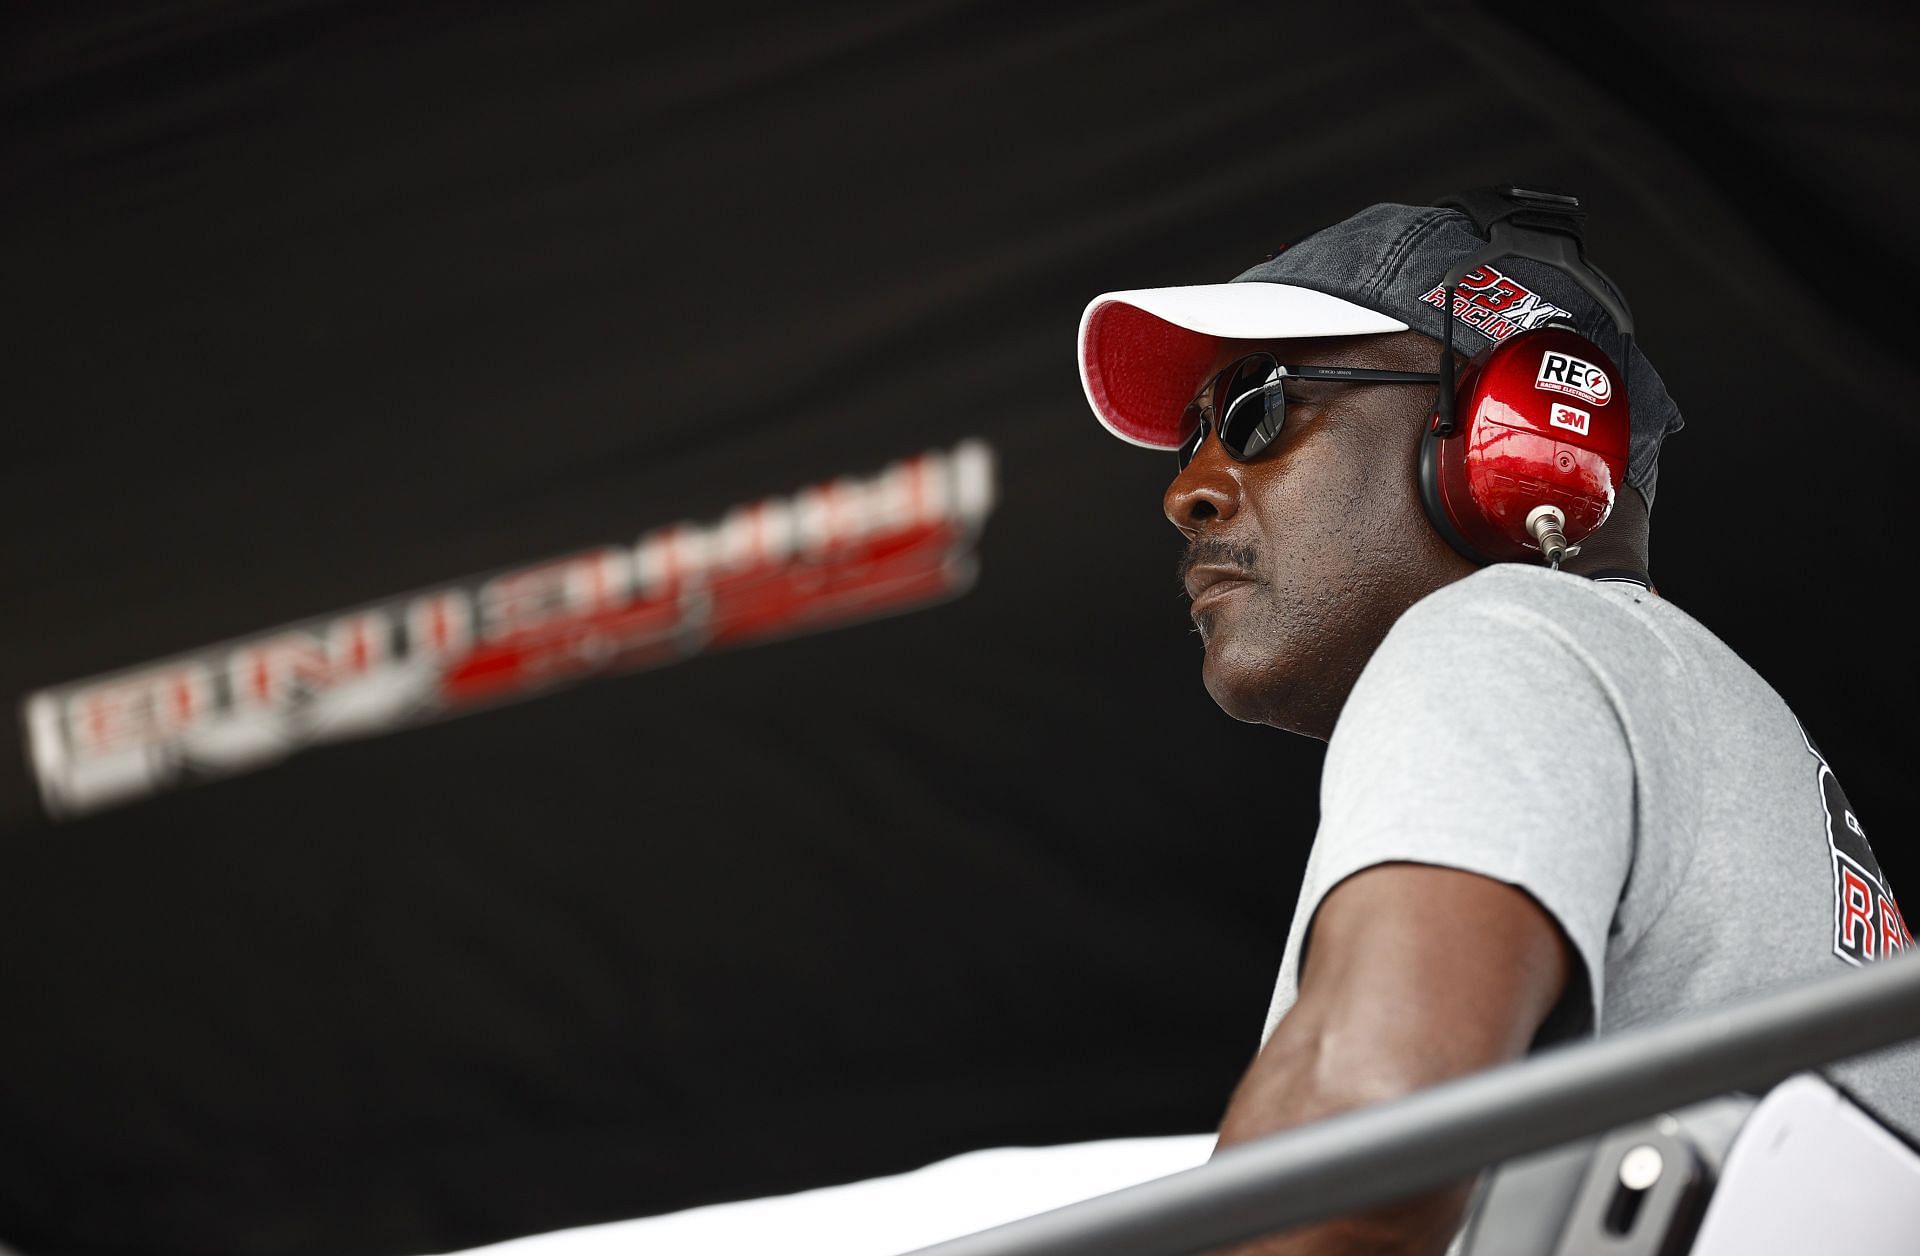 Michael Jordan in attendance at the NASCAR Cup Series Go Bowling